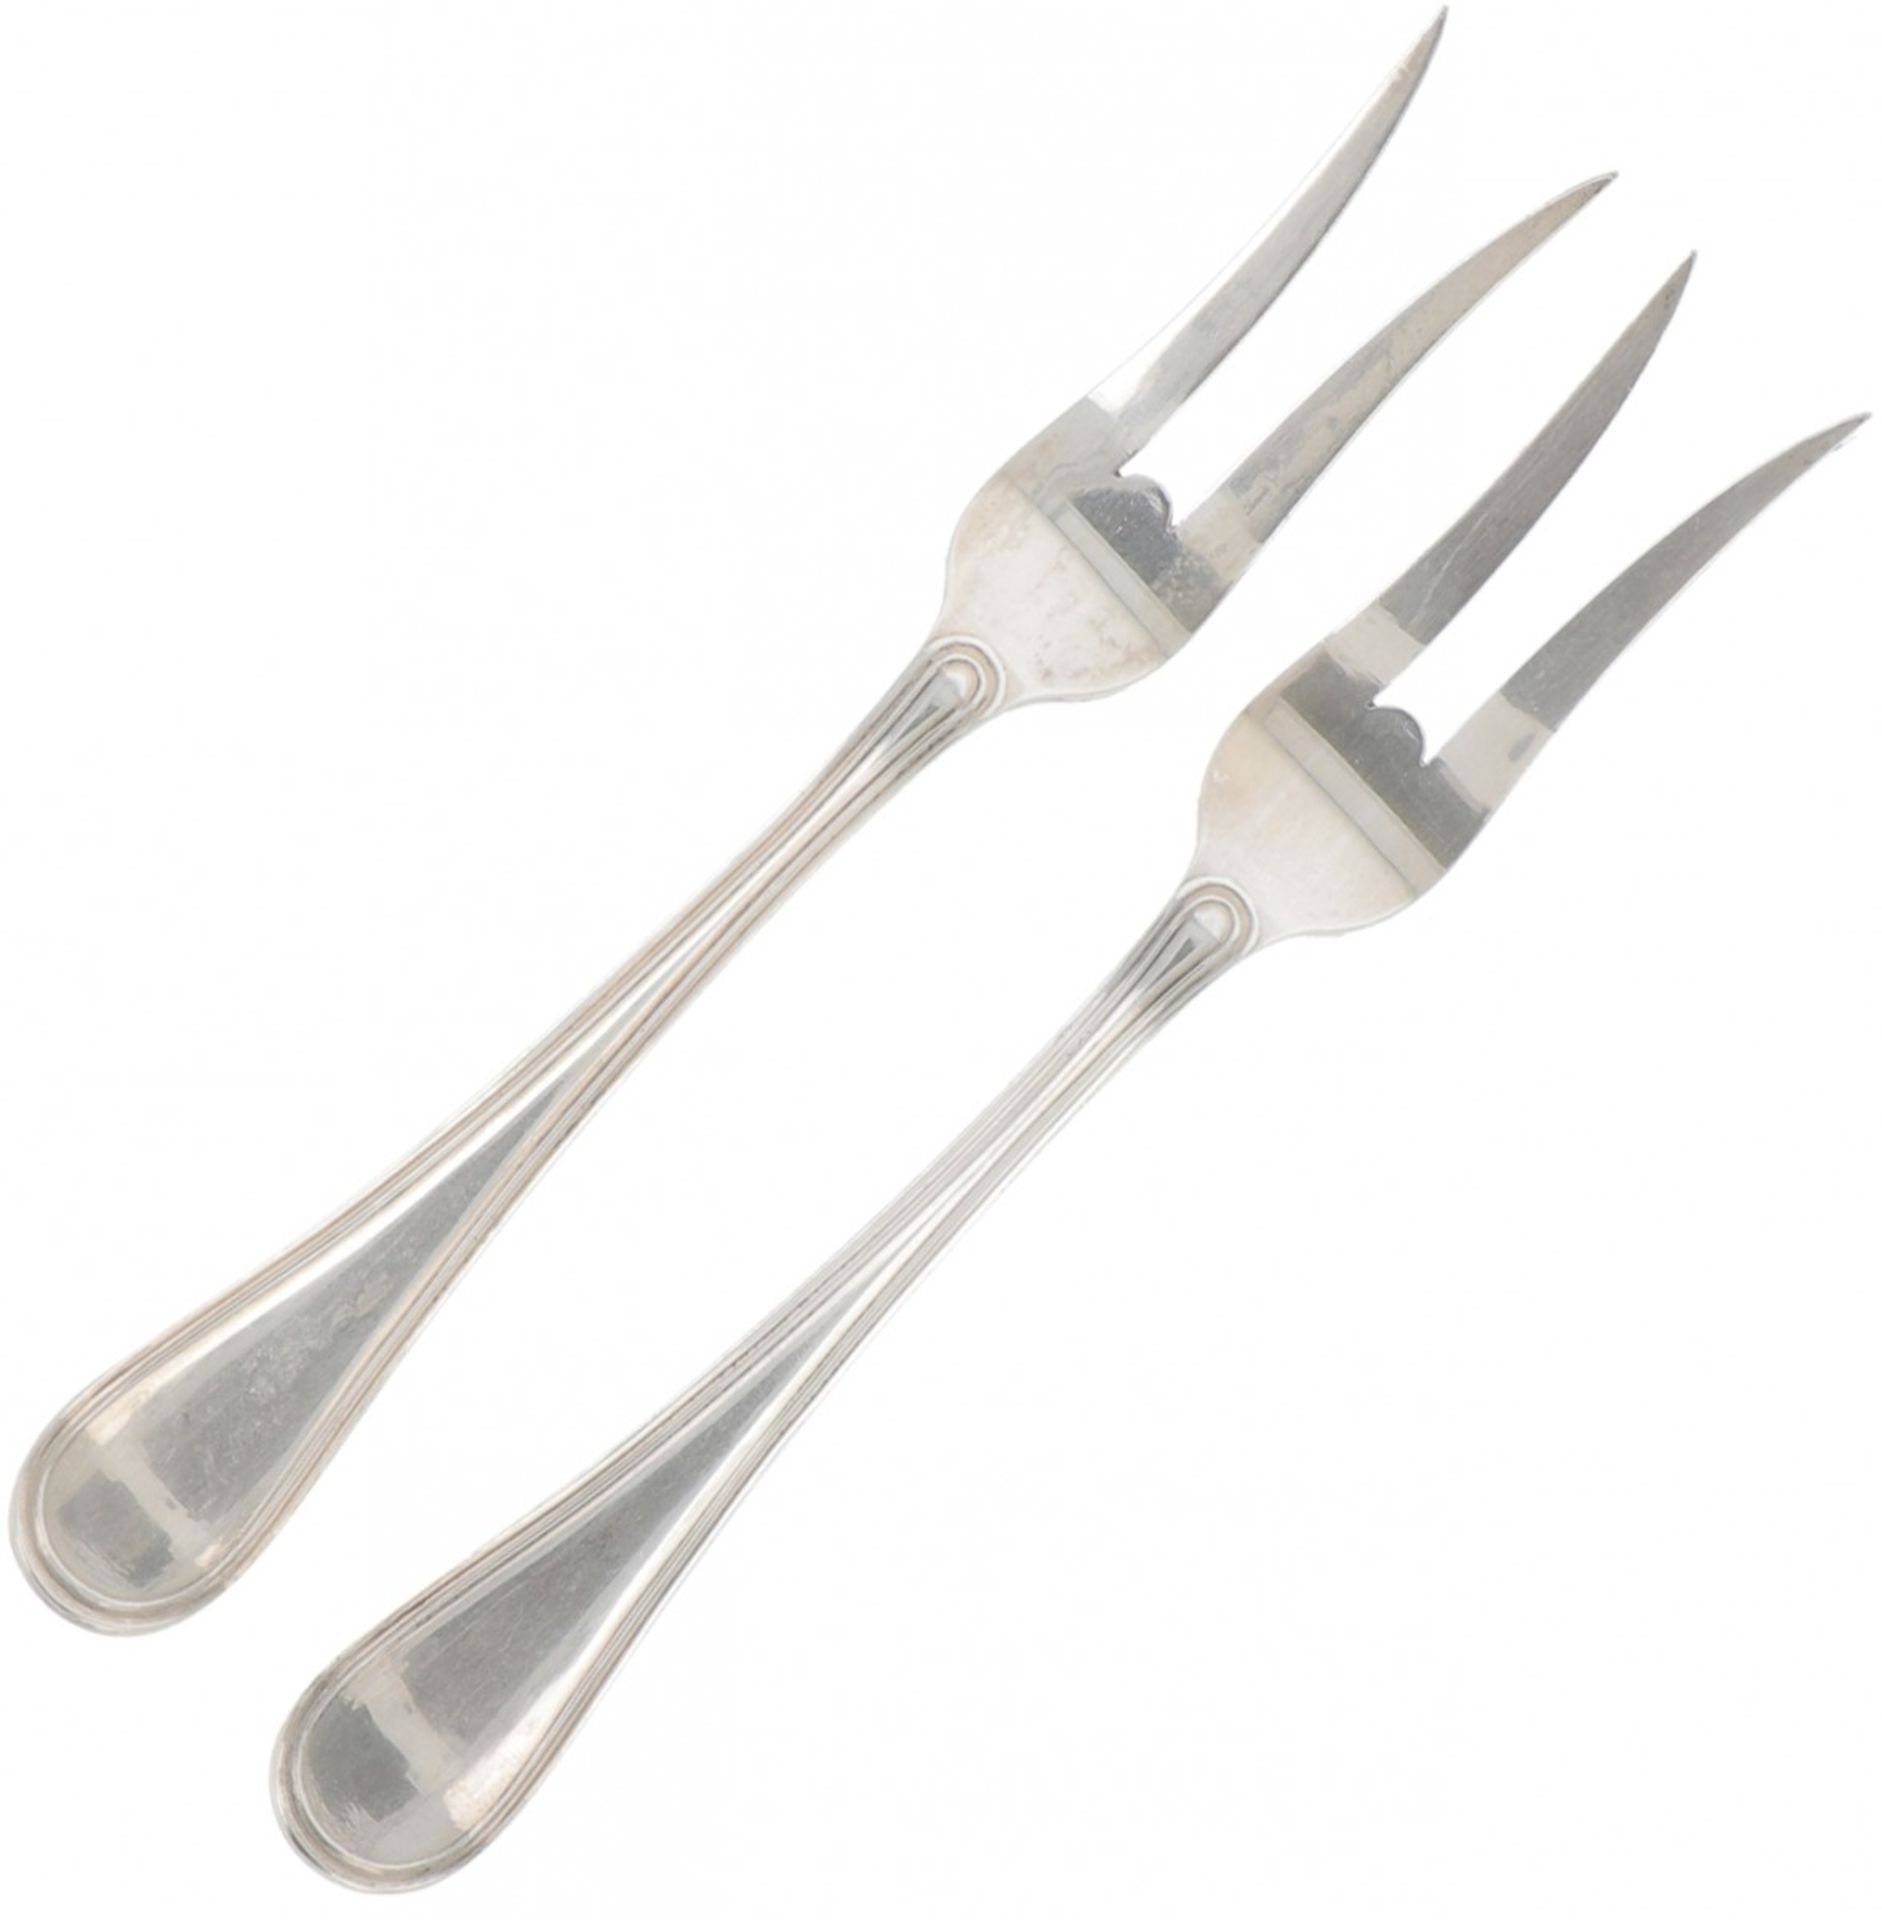 (2) piece set of meat forks silver.